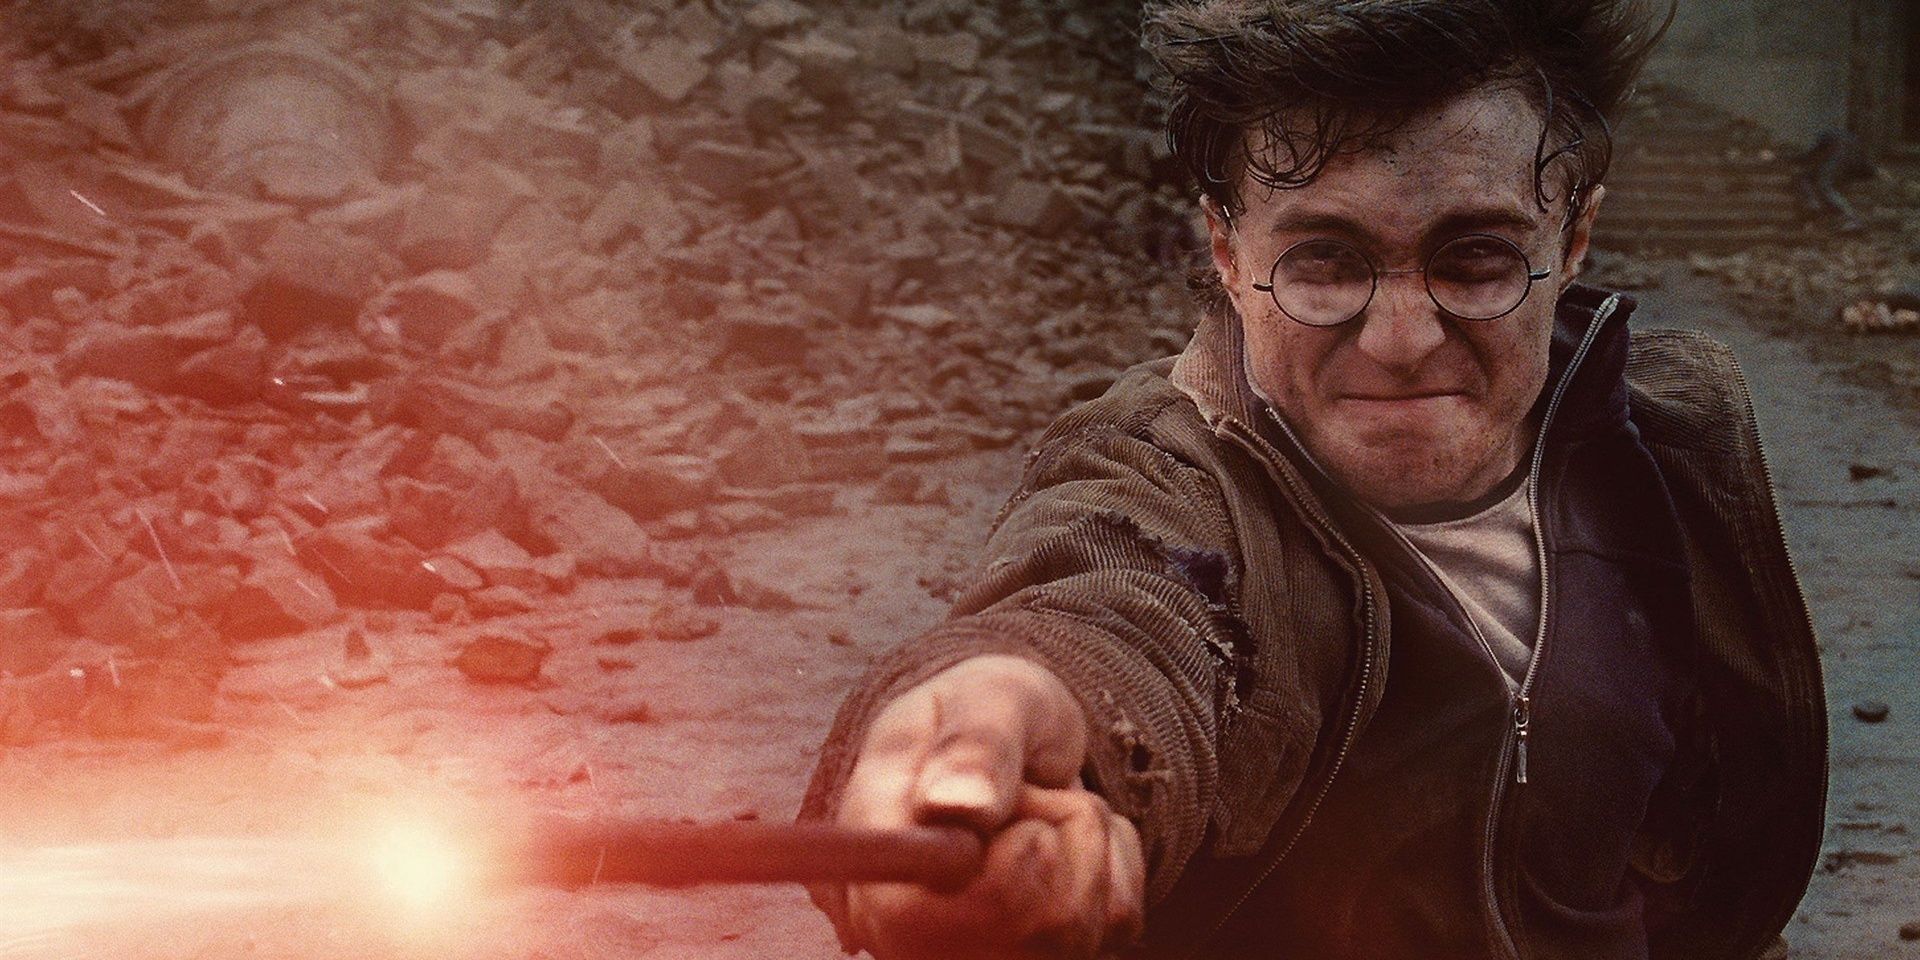 Harry fights Voldemort at the Battle of Hogwarts in Harry Potter and the Deathly Hallows